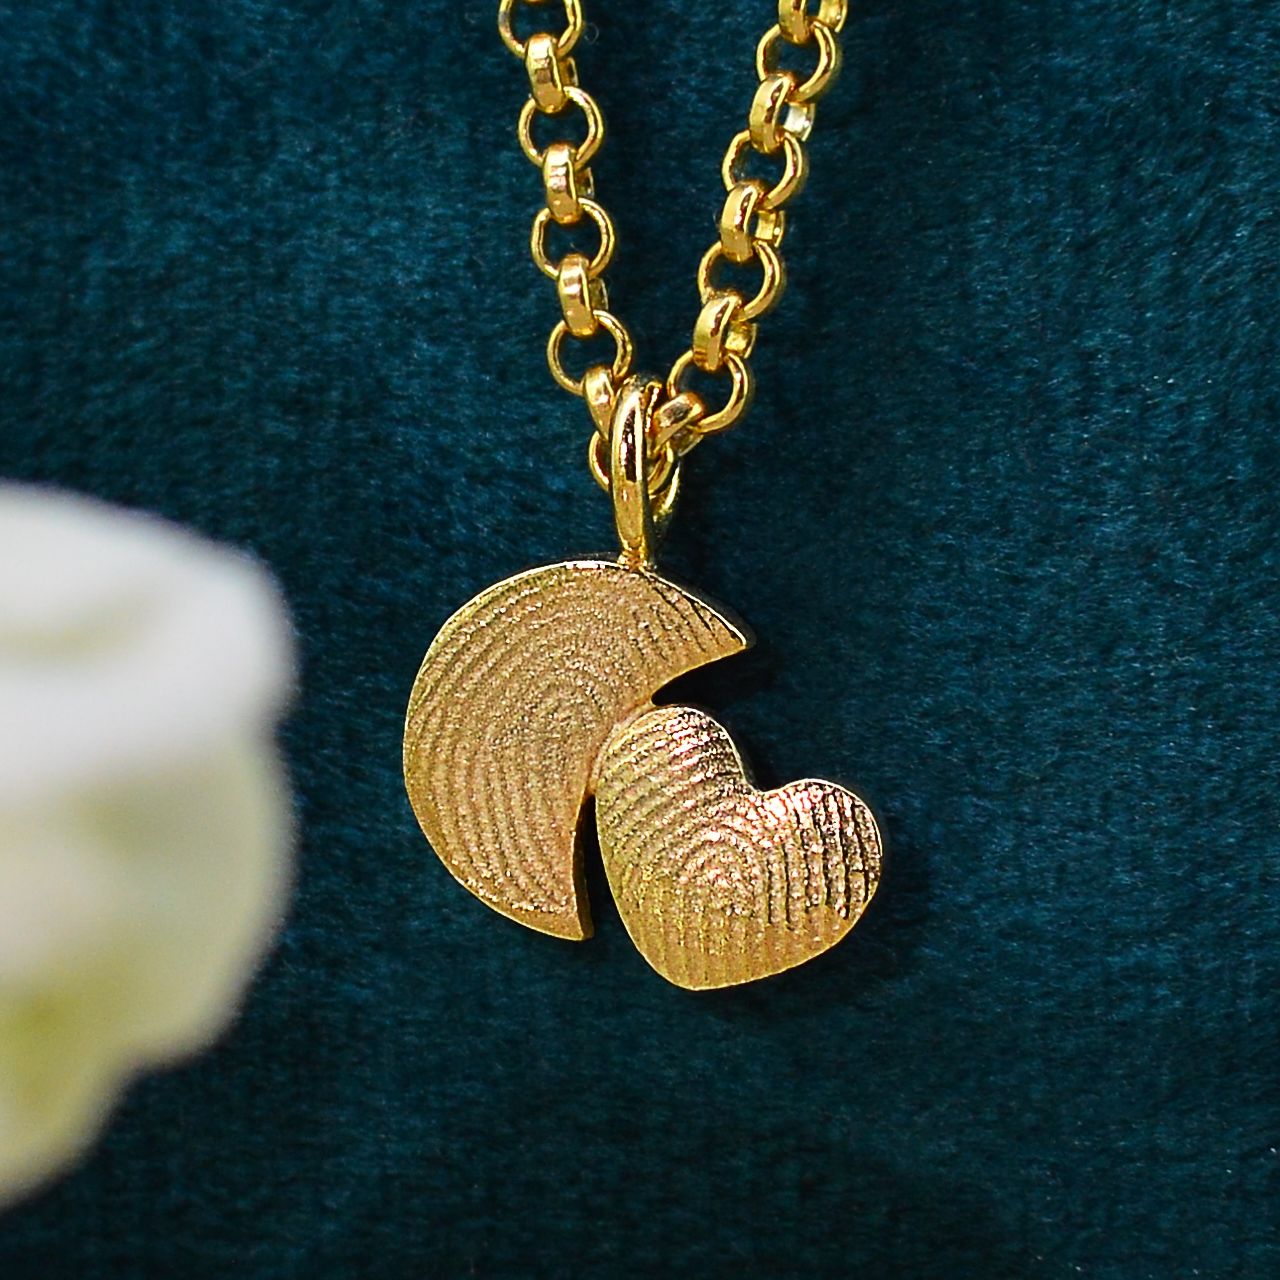 Family Fingerprint Necklace for Mum in solid 18ct gold | Moon and Heart Necklace | Displayed on an 18ct gold belcher or rolo chain | Custom engraving on reverse | Personalised Necklace | Sophia Alexander Fingerprint Jewellery | Handmade in Suffolk UK